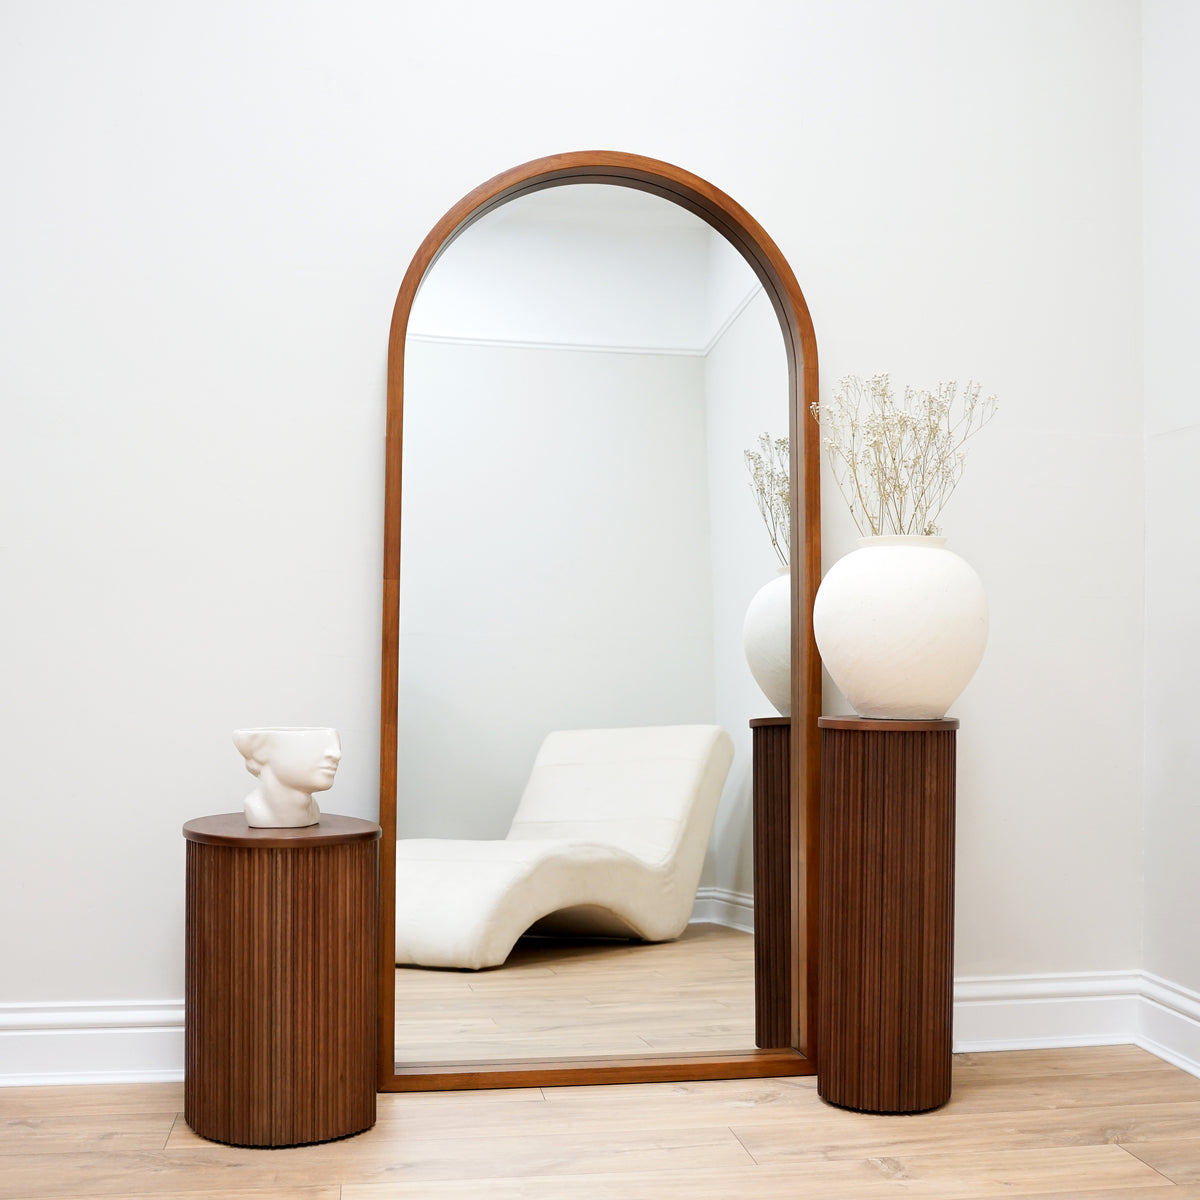 Walnut Organic Full Length Wooden Arched Mirror between two pedestals